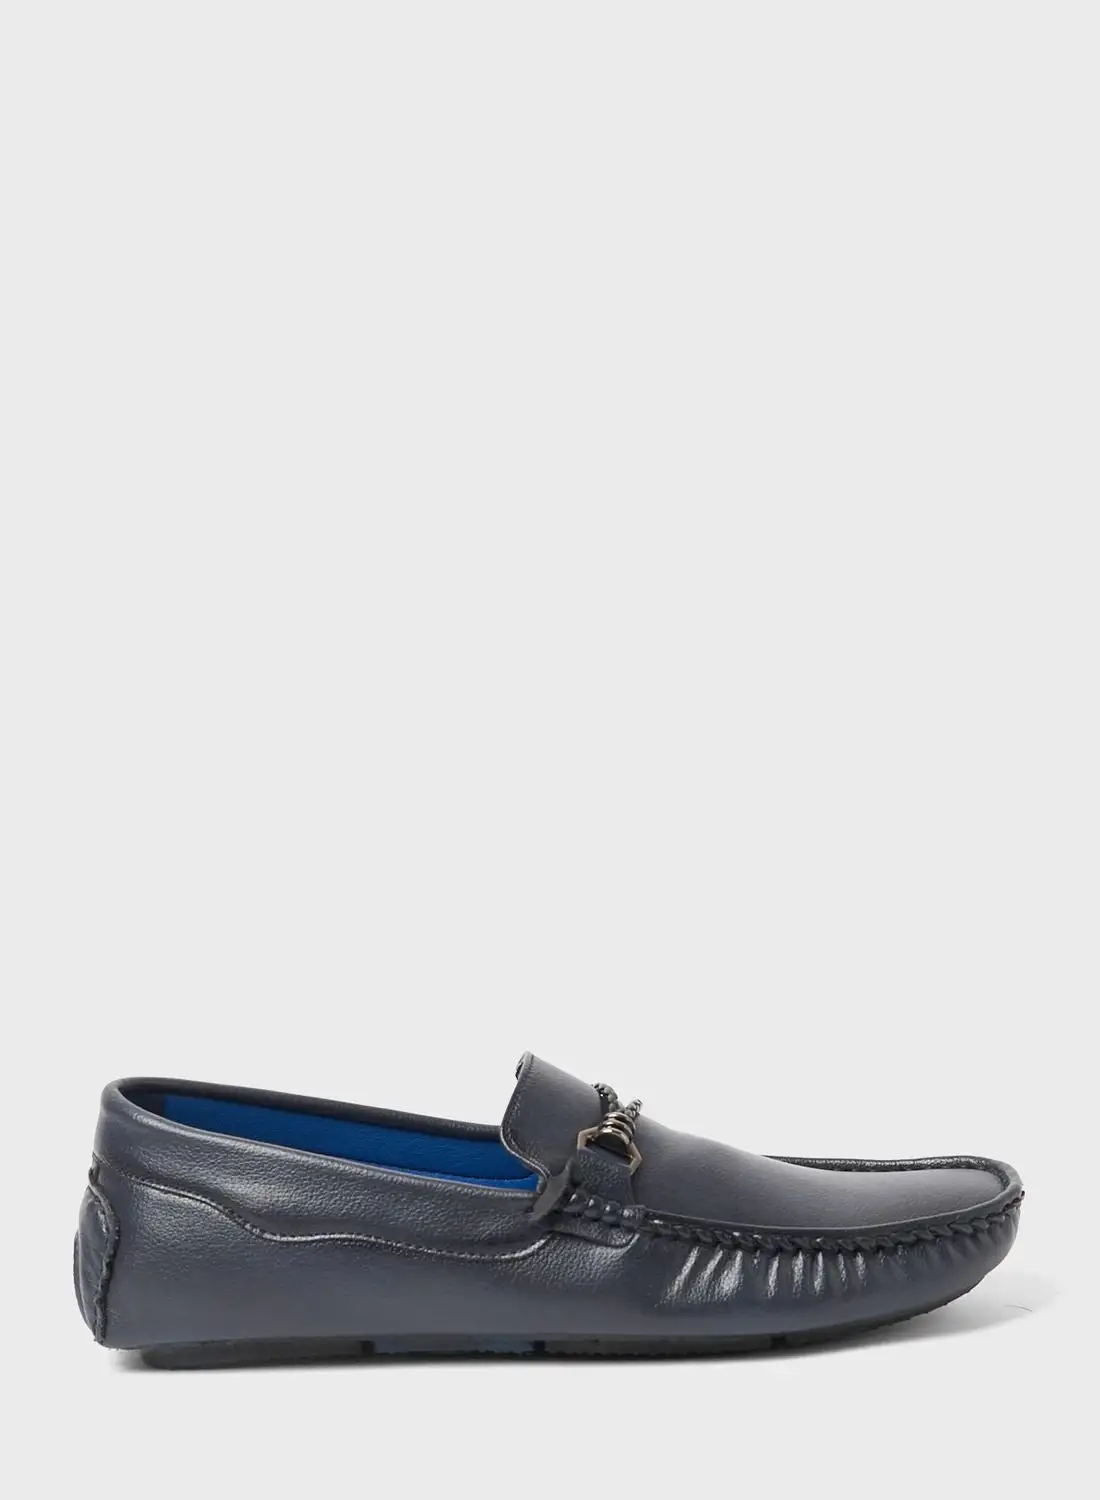 Geoomnii Casual Slip Ons Loafers